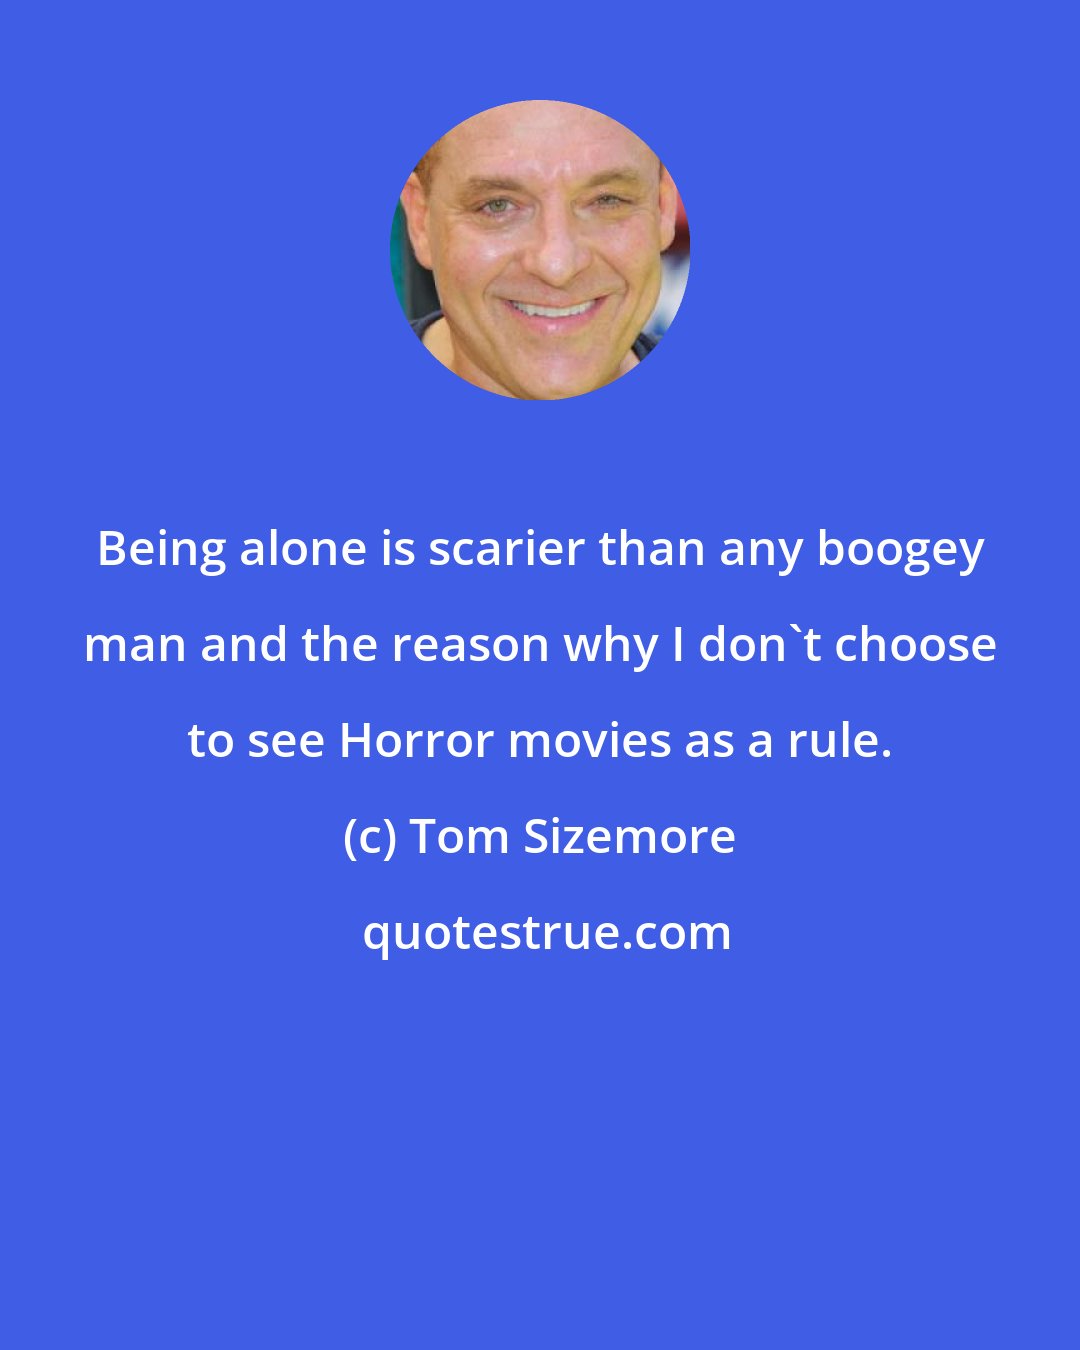 Tom Sizemore: Being alone is scarier than any boogey man and the reason why I don't choose to see Horror movies as a rule.